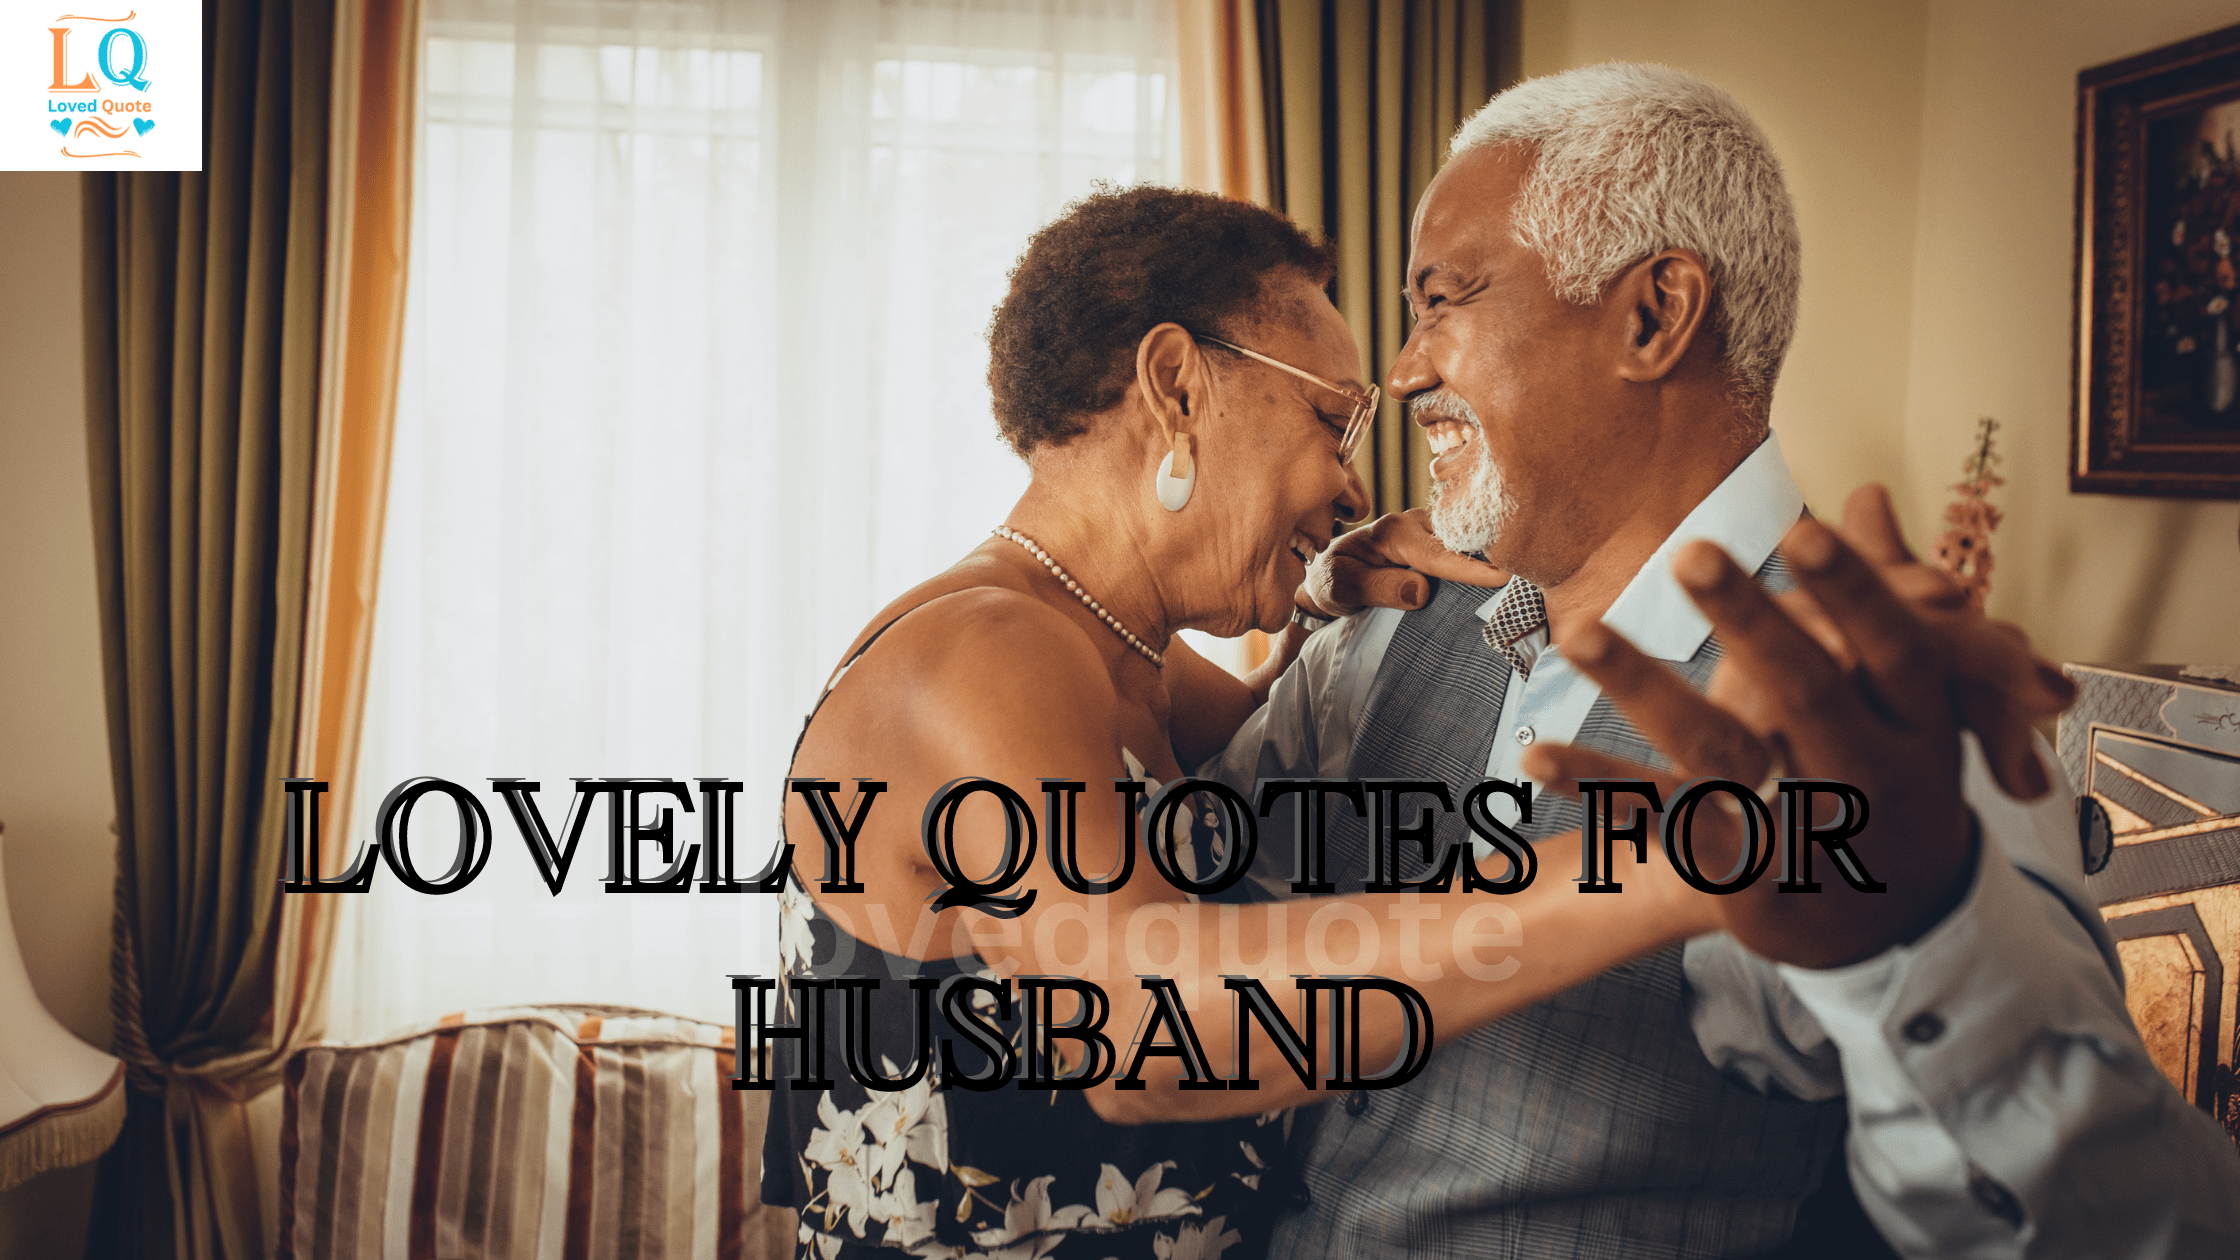 Lovely Quotes for Husband